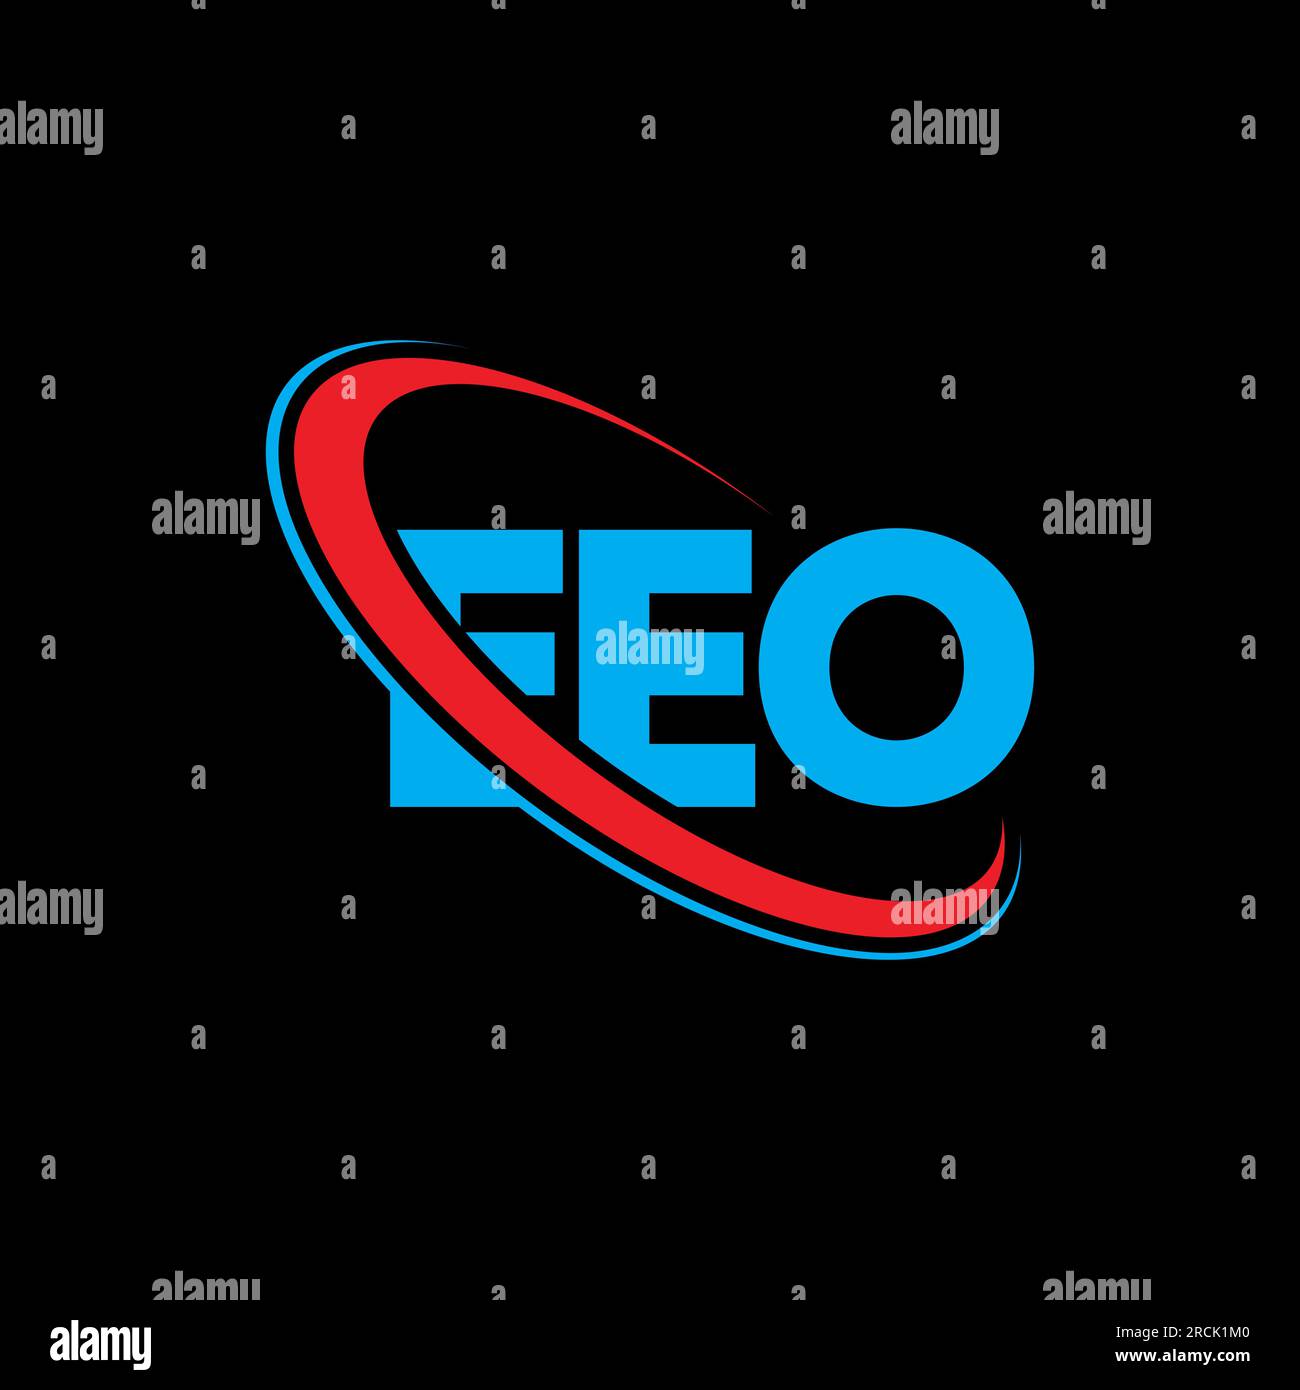 EEO logo. EEO letter. EEO letter logo design. Initials EEO logo linked with circle and uppercase monogram logo. EEO typography for technology, busines Stock Vector